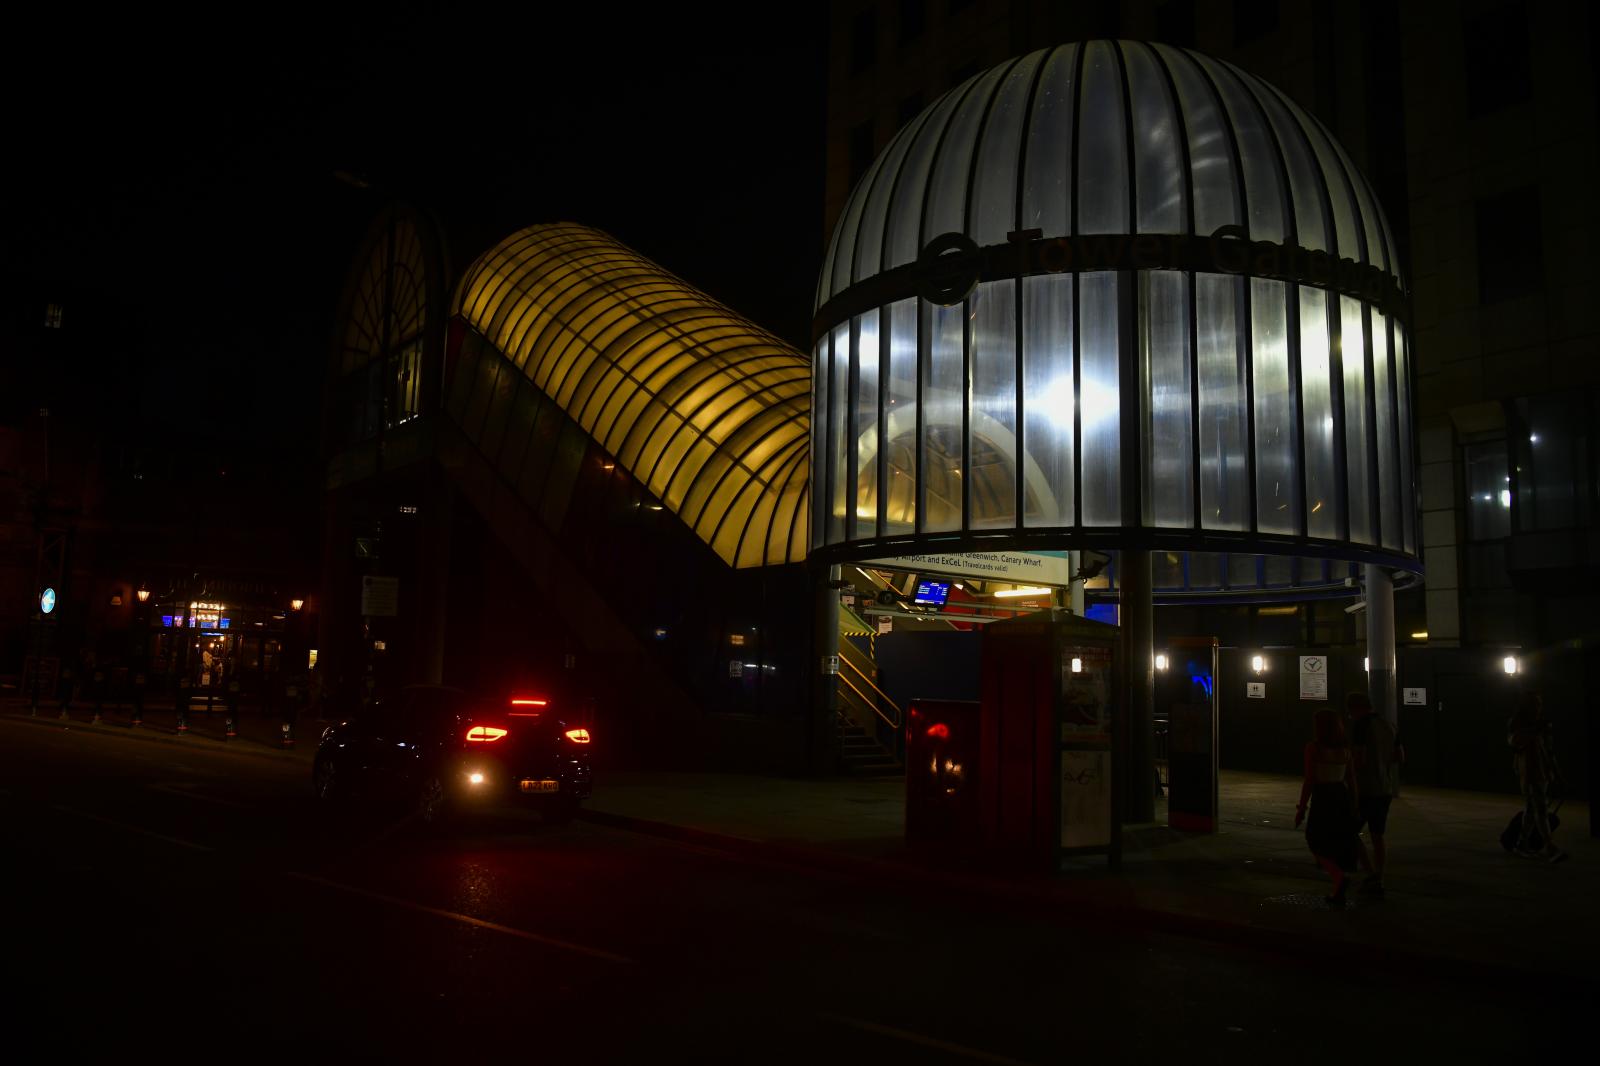 Image from Daily Life UK - Canary Wharf station looks so pretty at night